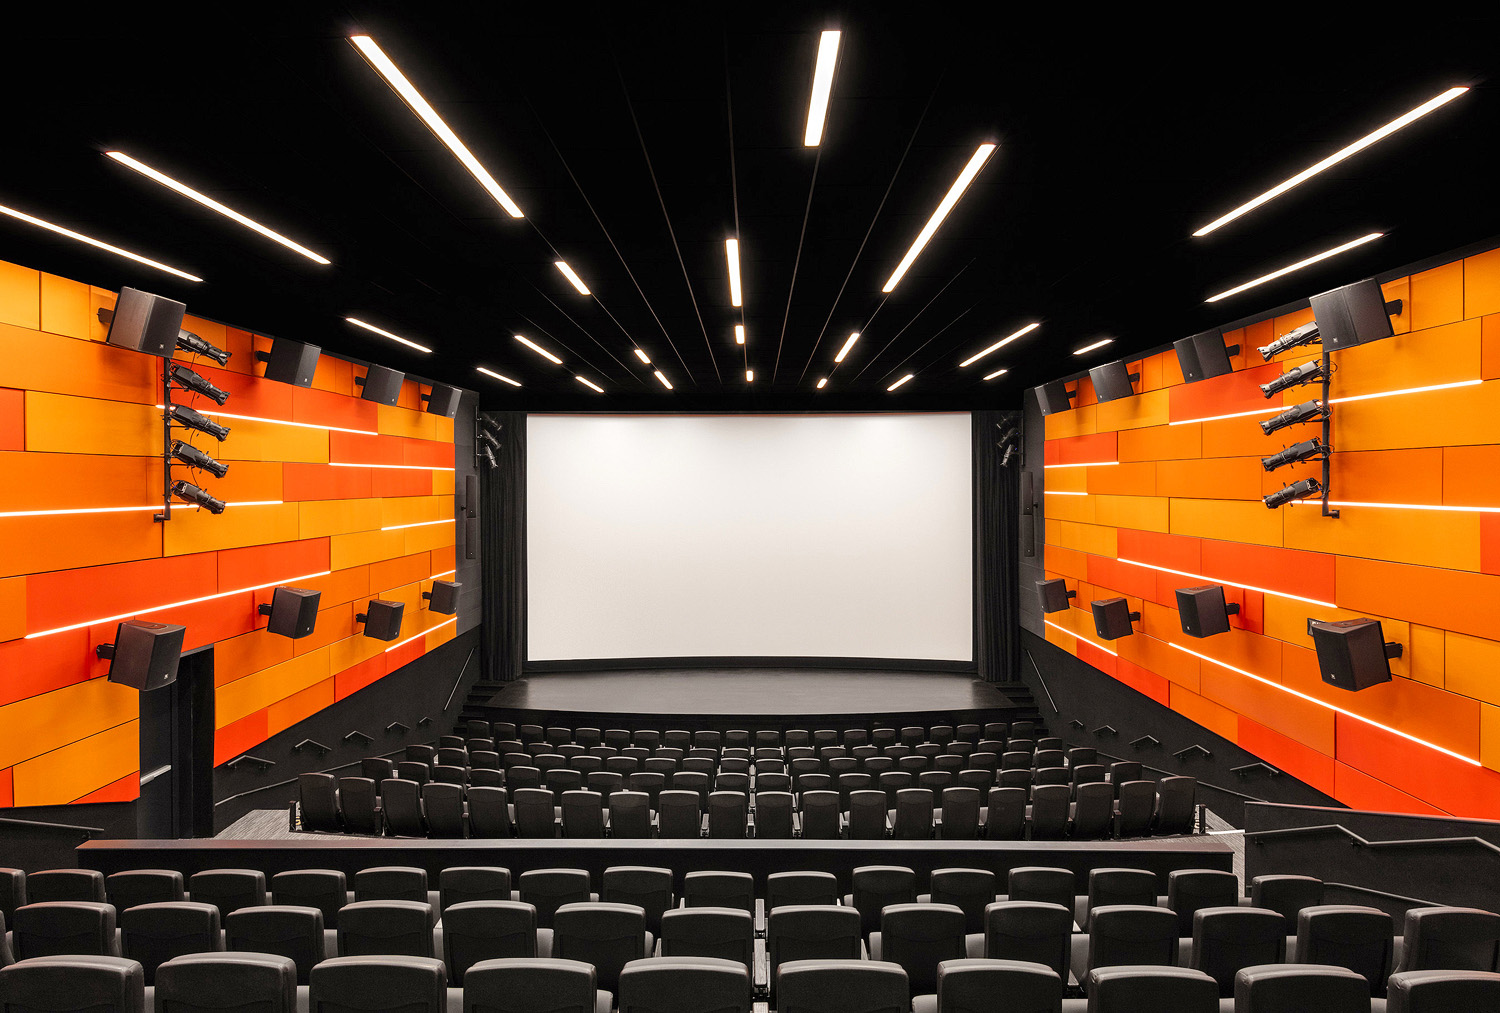 The Cinemark® Theater within the museum includes a movie projection system with an integrated sound system and a separate AV system that supports public and private events.